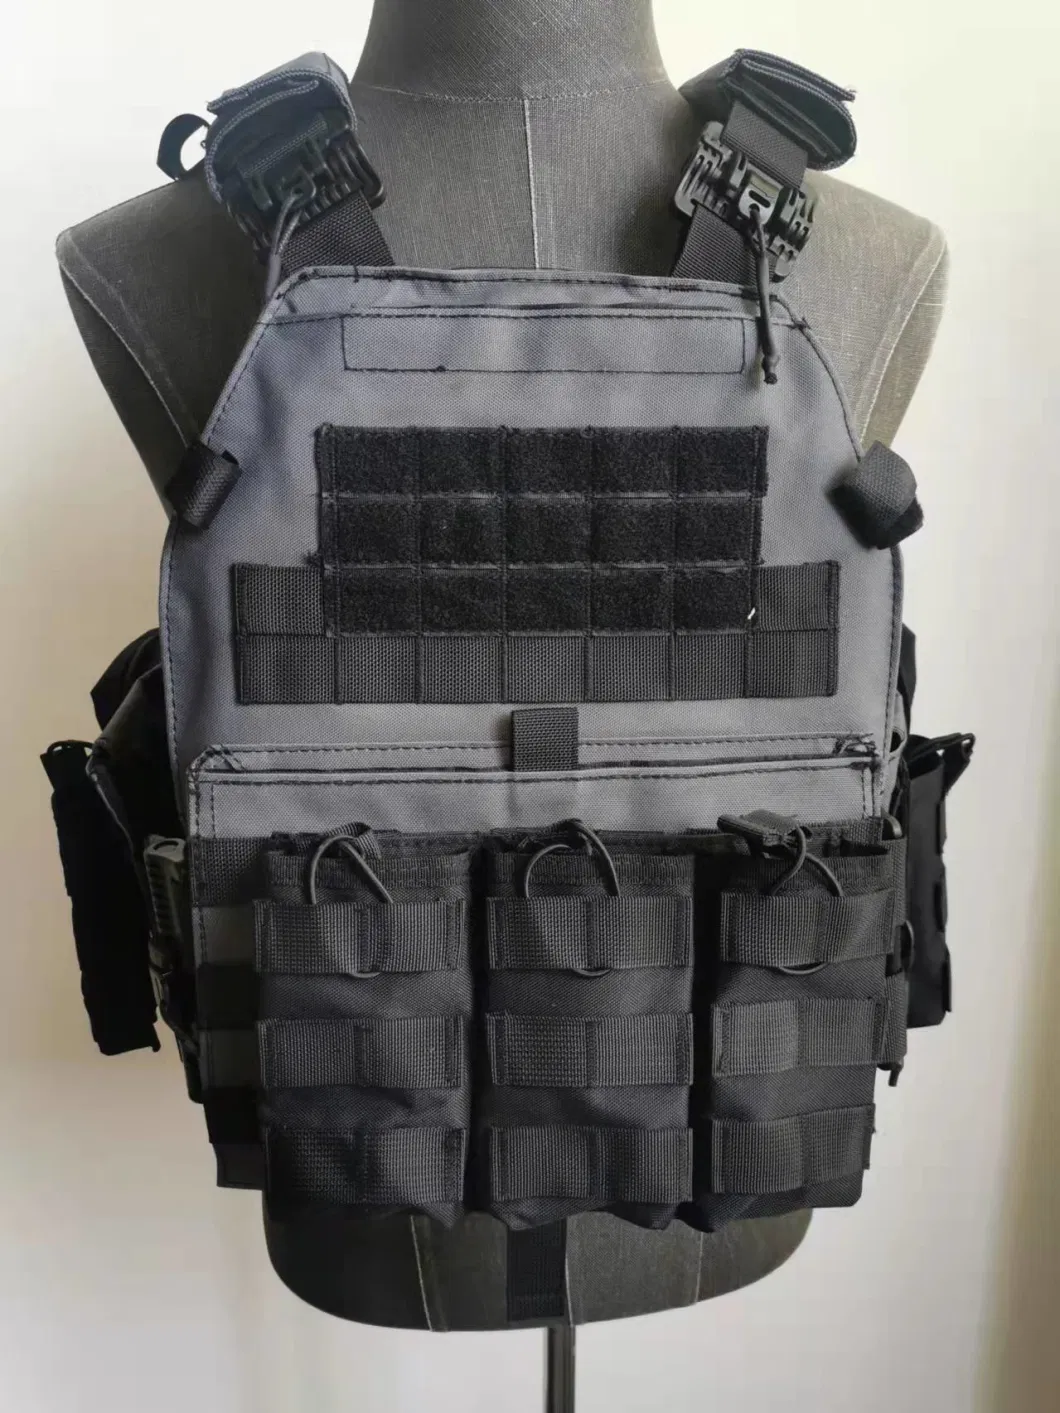 Military Swat Combat Hunting Shooting Quick Release Molle Training Tactical Vest